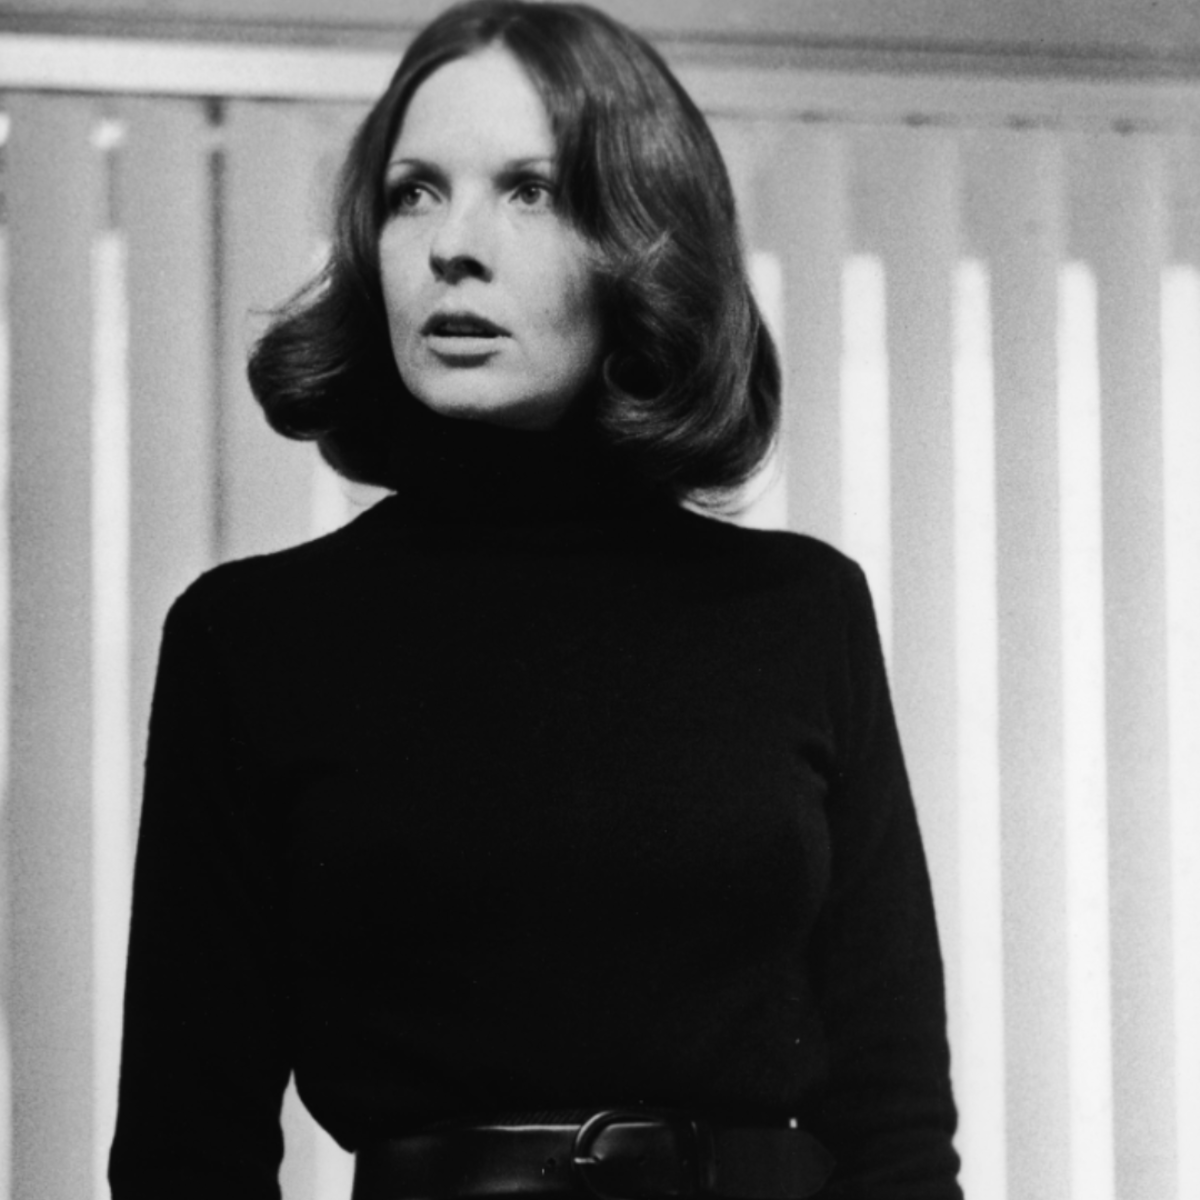 The Godfather Trilogy: Diane Keaton's Compelling Portrayal of Kay Adams